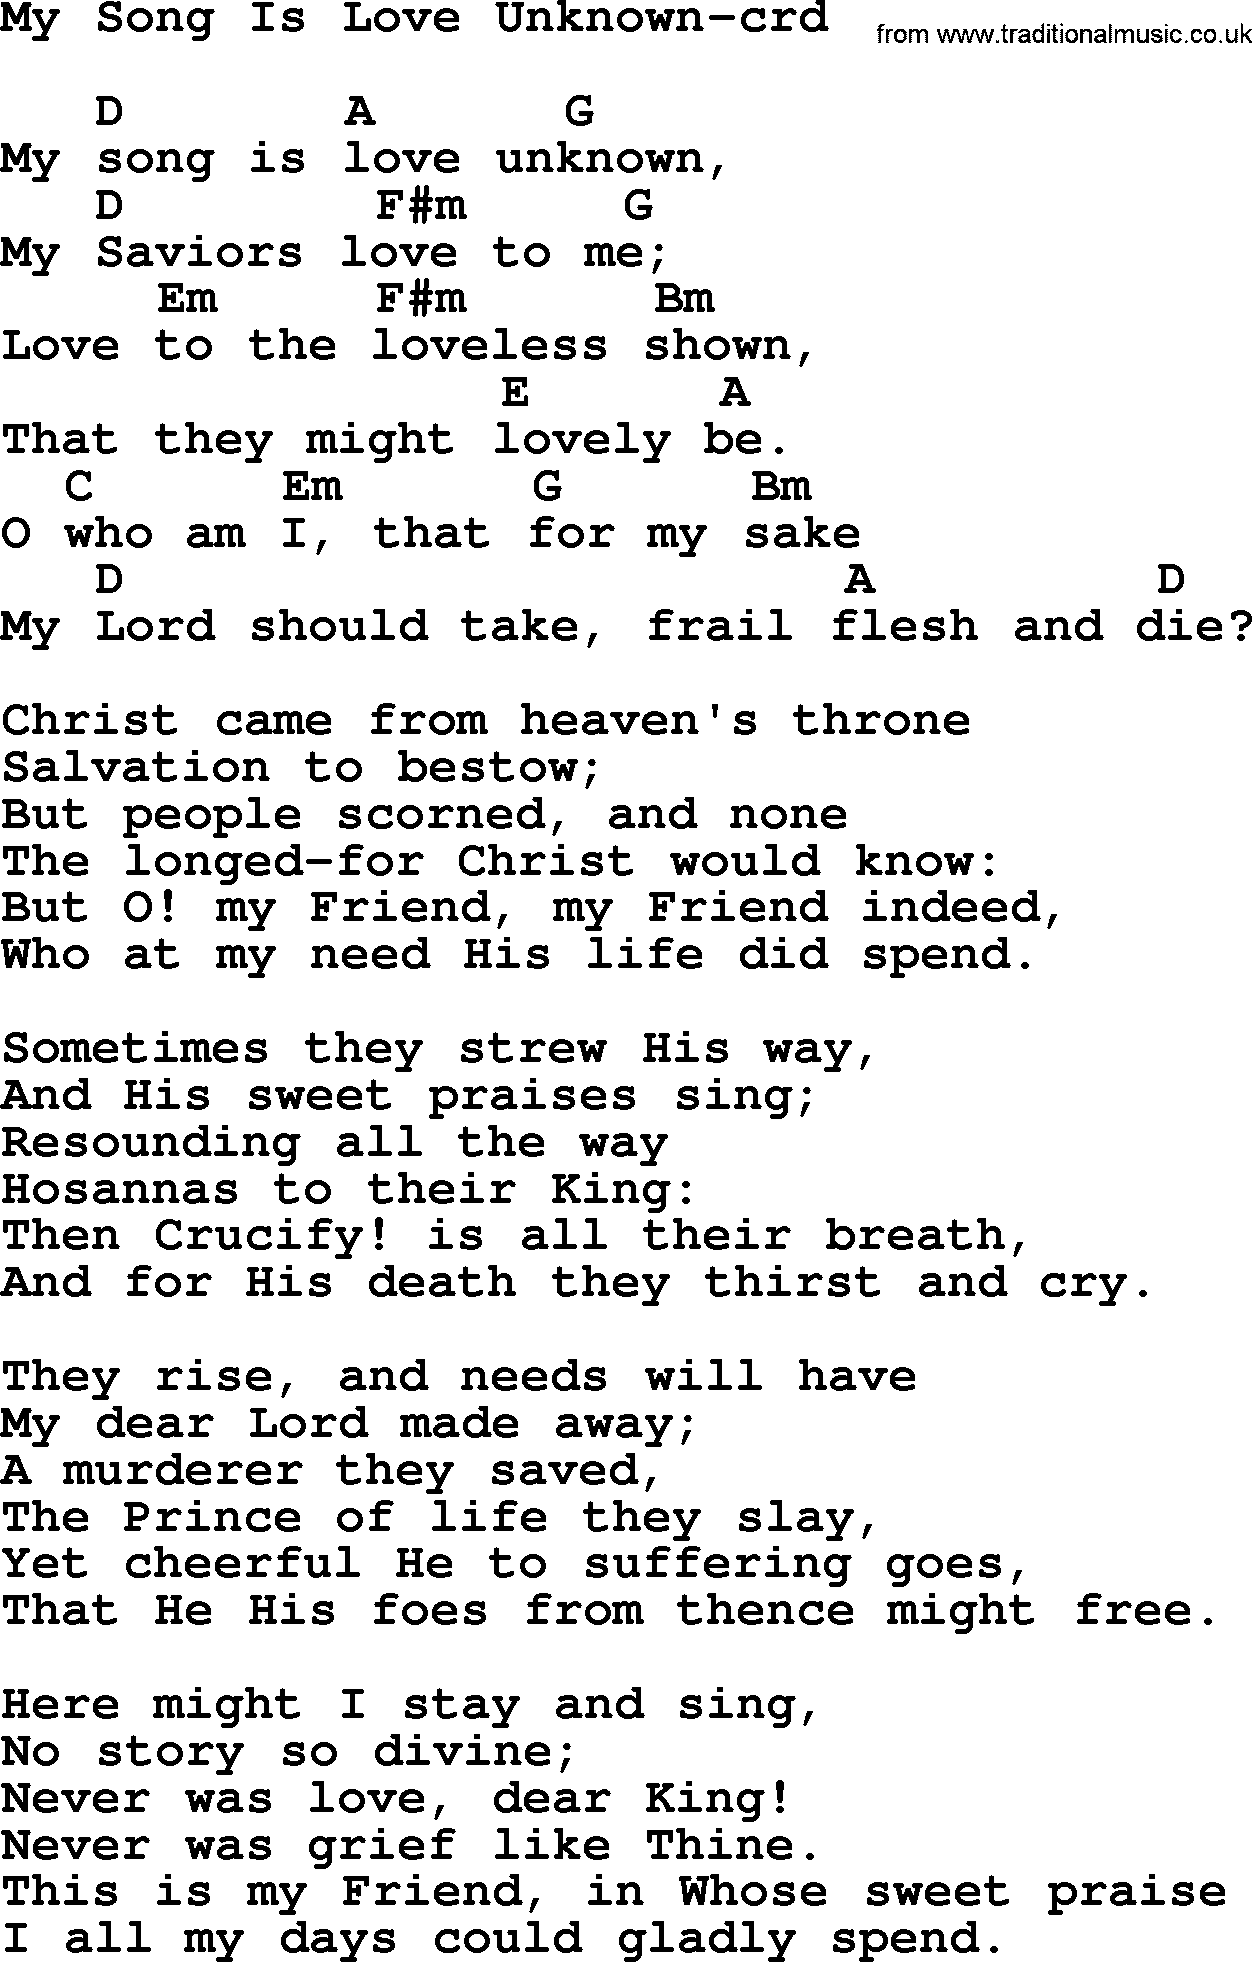 Top 500 Hymn: My Song Is Love Unknown, lyrics and chords